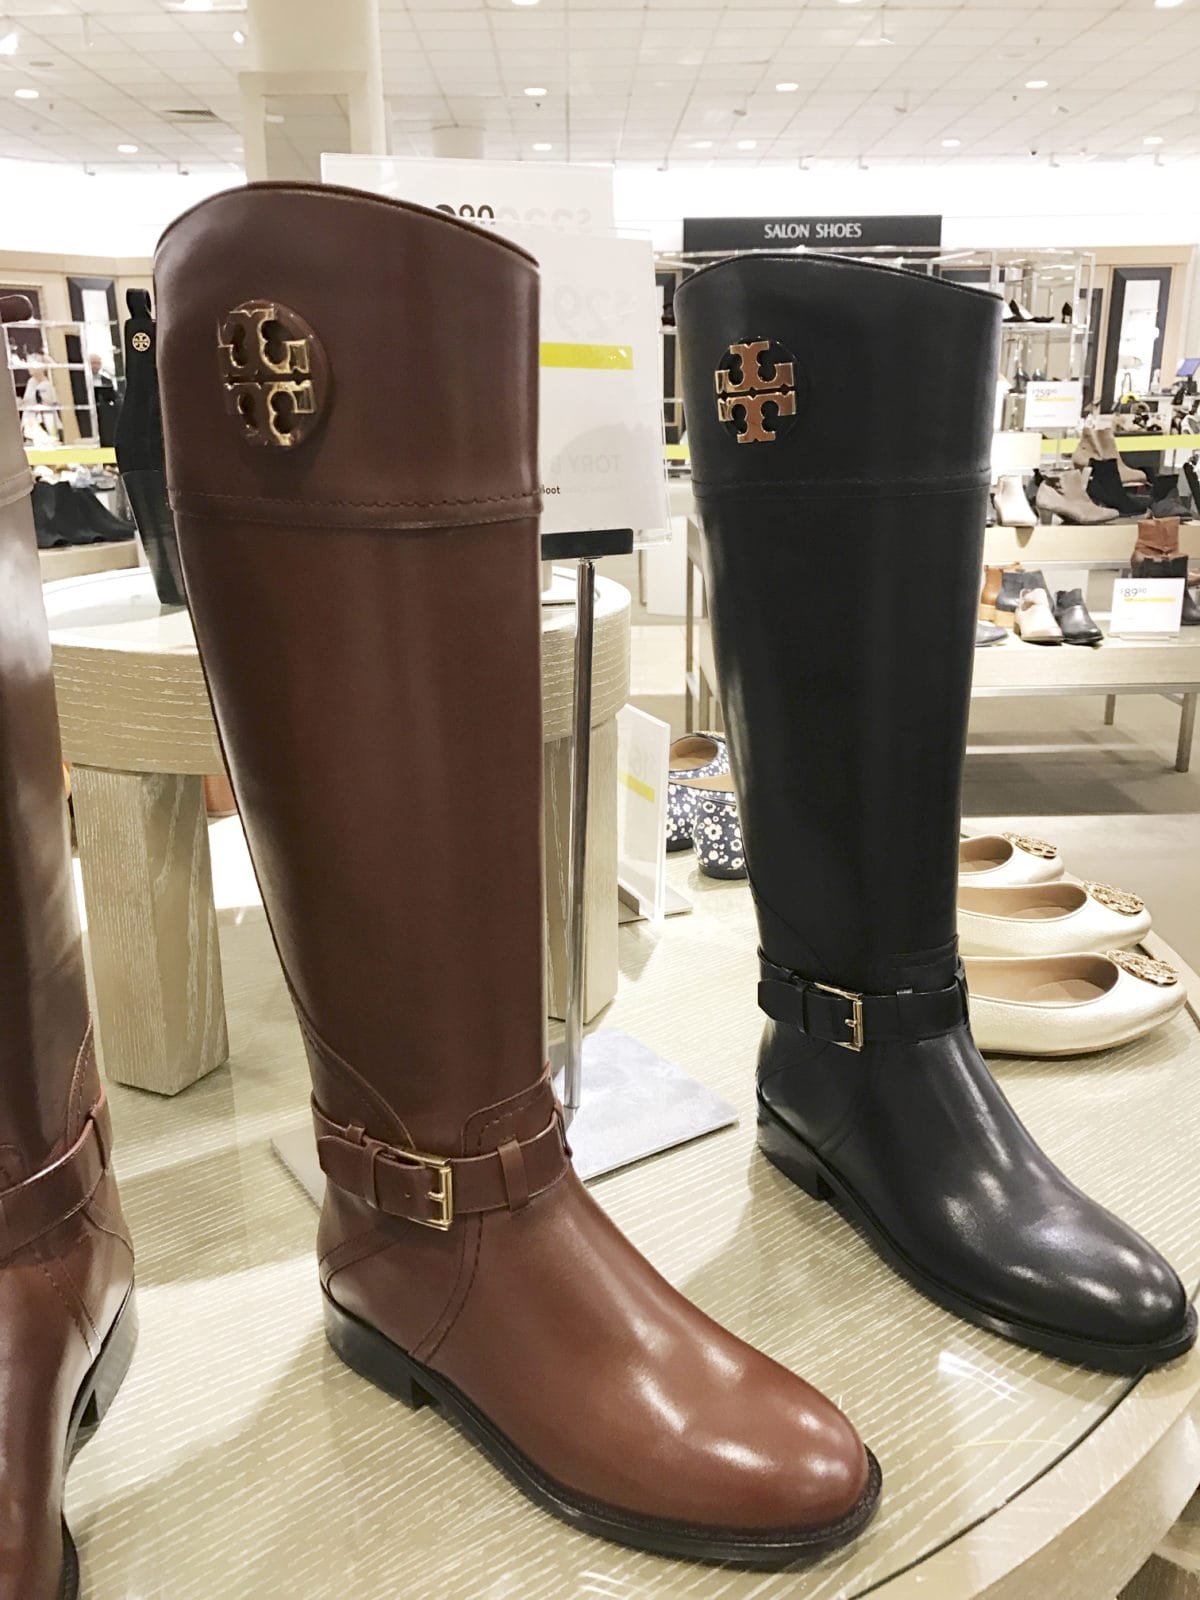 Tory Burch Riding Boot Nordstrom Anniversary Sale 2017